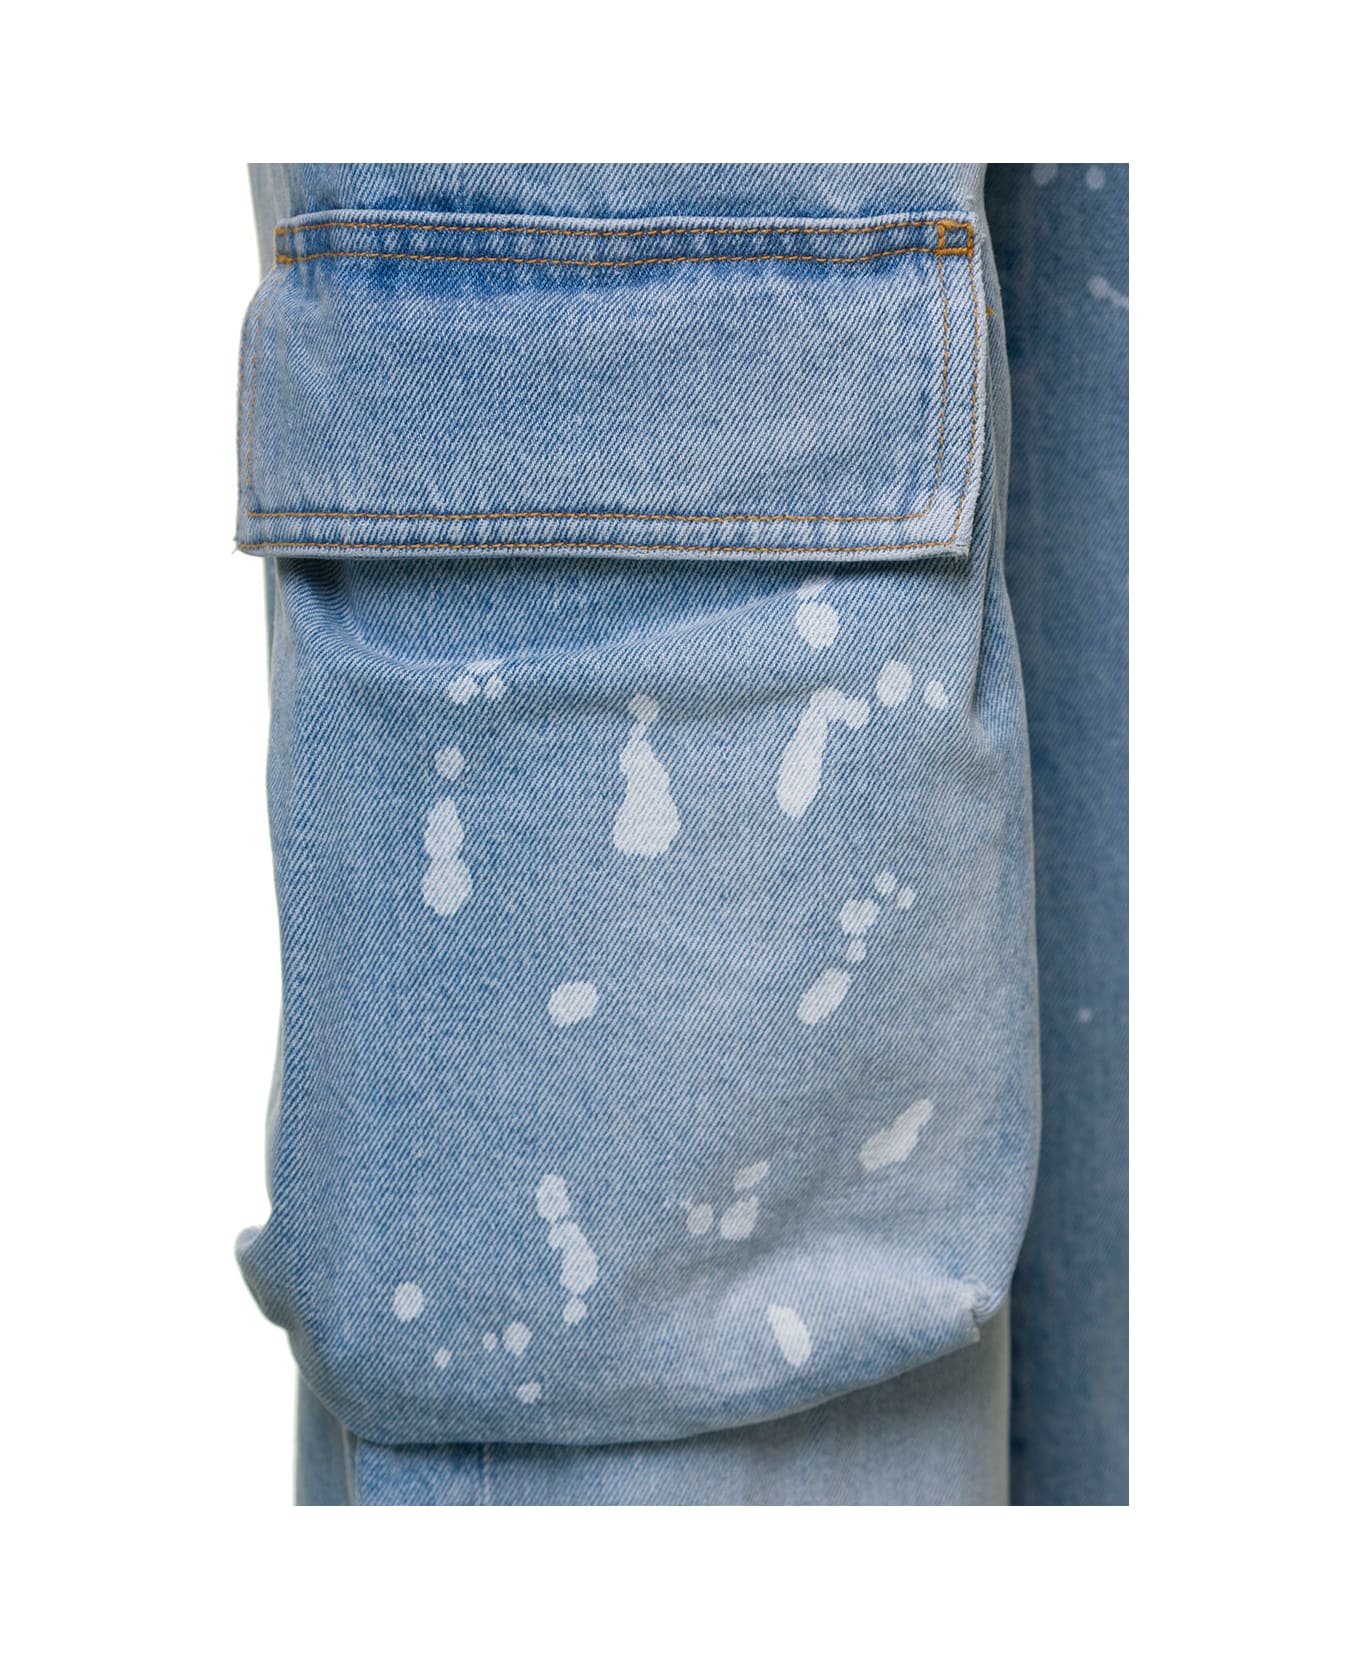 Off-White Light Blue Jeans With Cargo Pocket And Paint Stains In Cotton Denim Woman - Light blue デニム